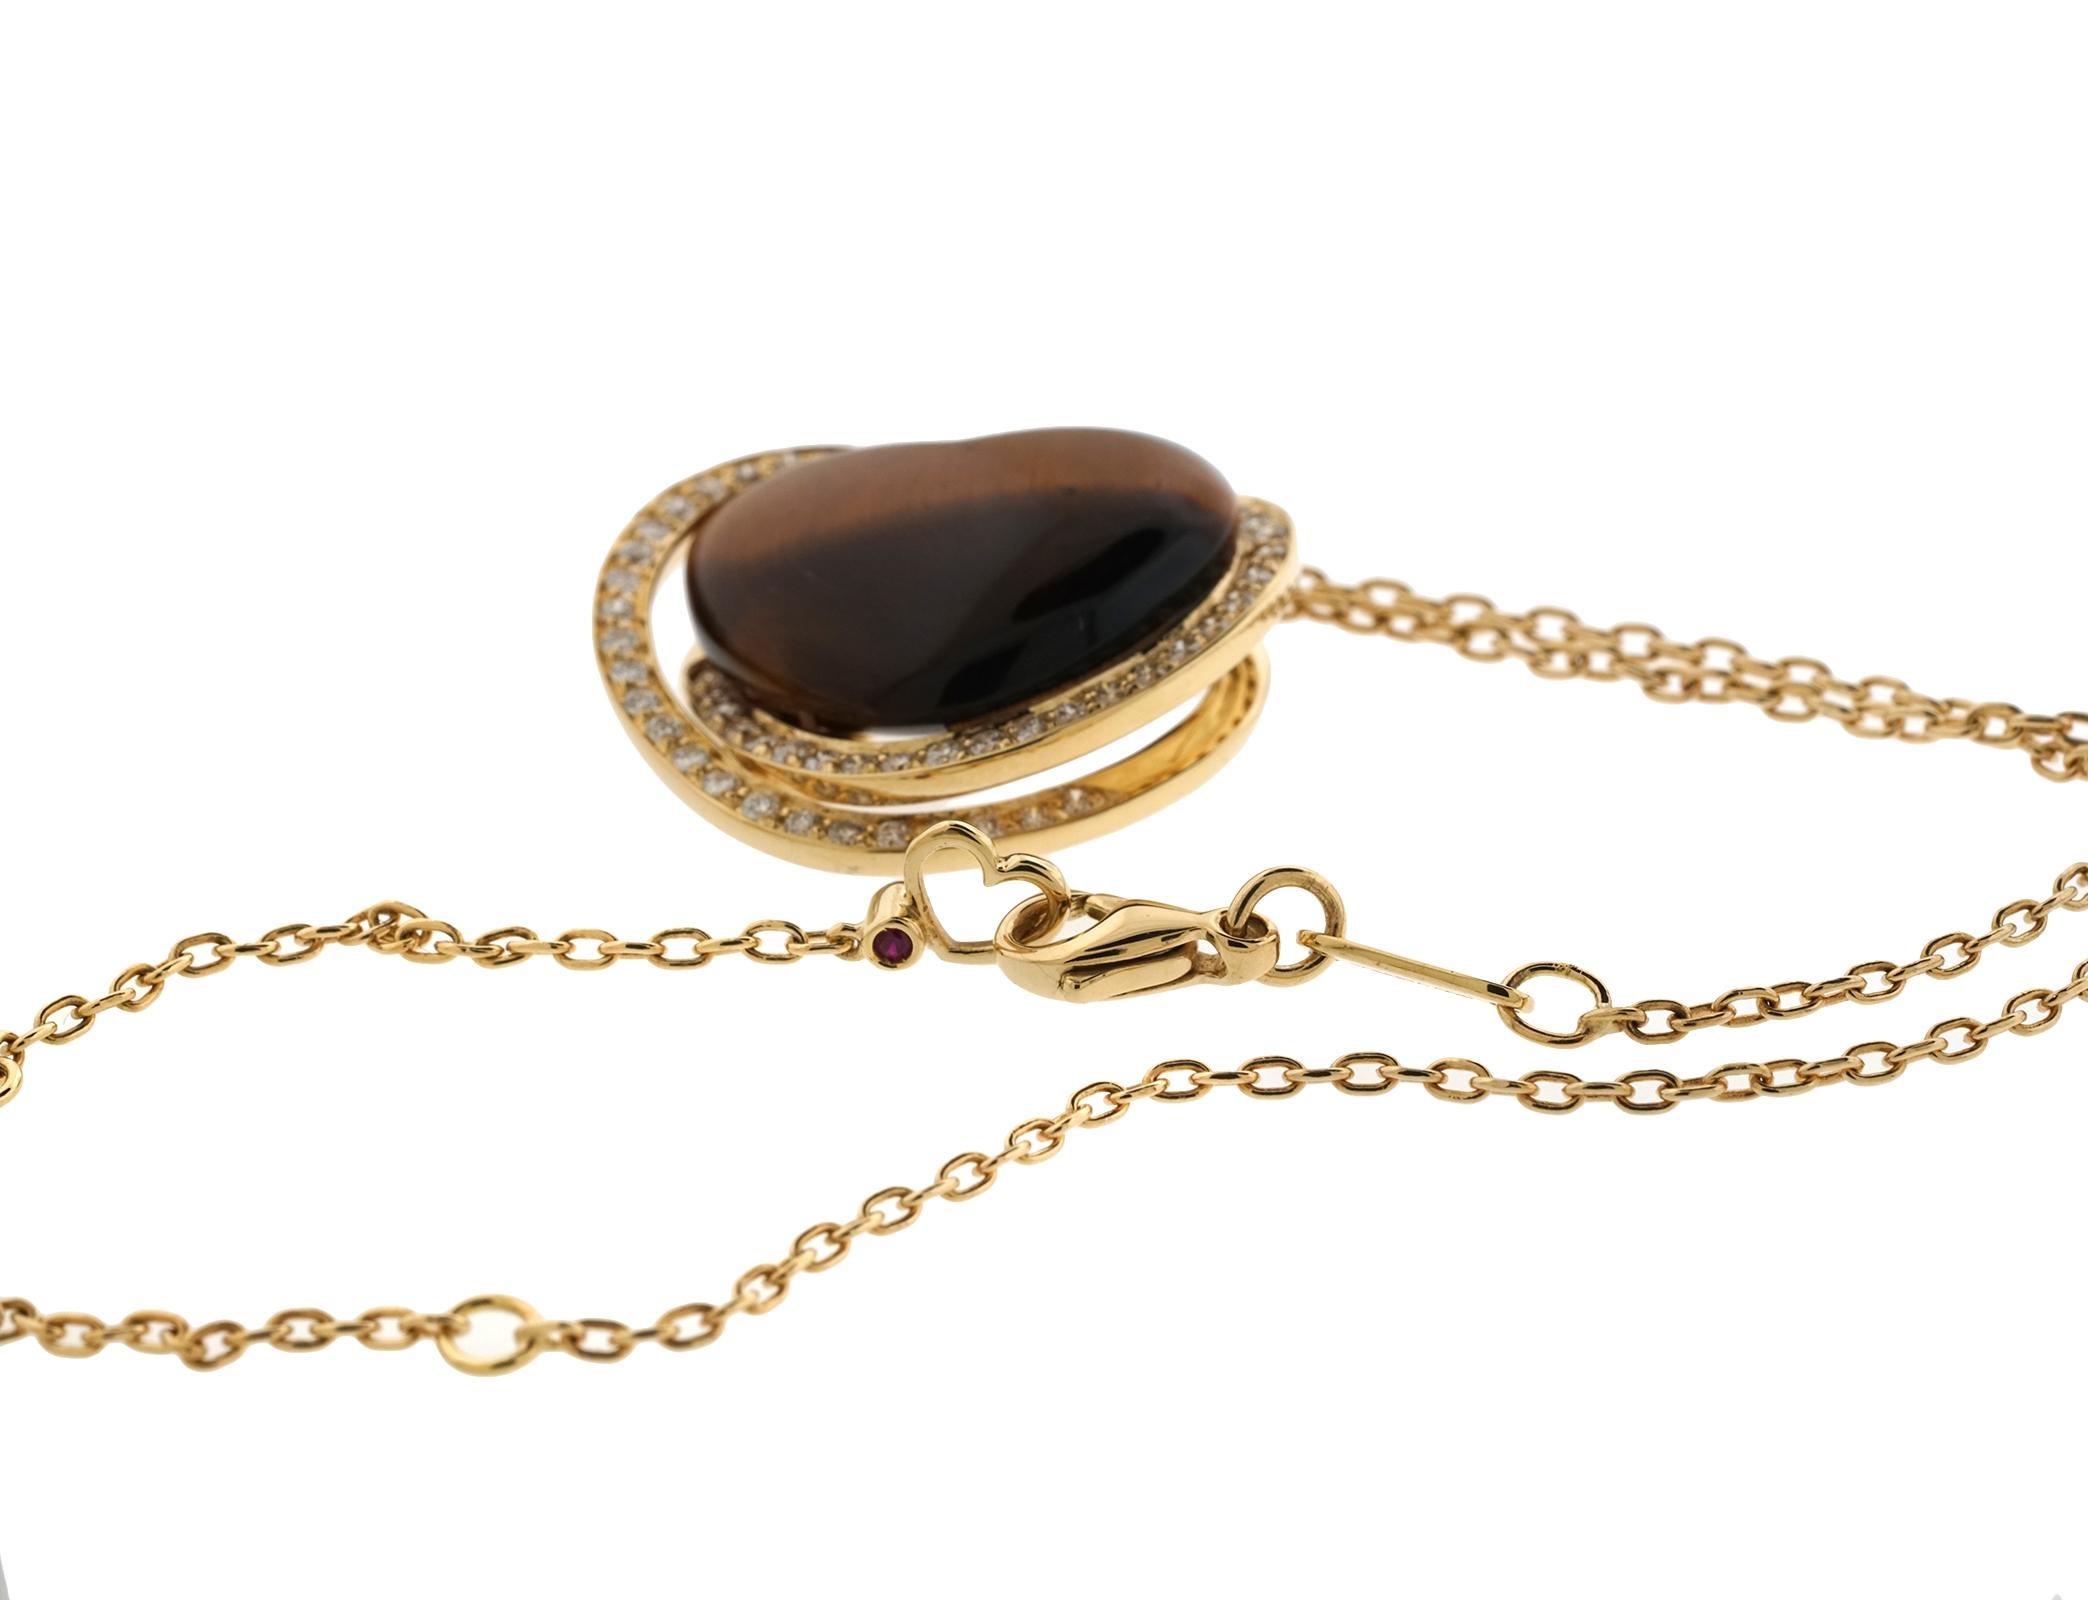 Roberto Coin Tigers Eye, heart shaped pendant. The necklace weighs 7.70 dwt, has 56 round diamonds in G color, VS Clarity for a total weight of .70cts. The necklace is 18 inches in length. Pendant is approx 25 x 20 mm